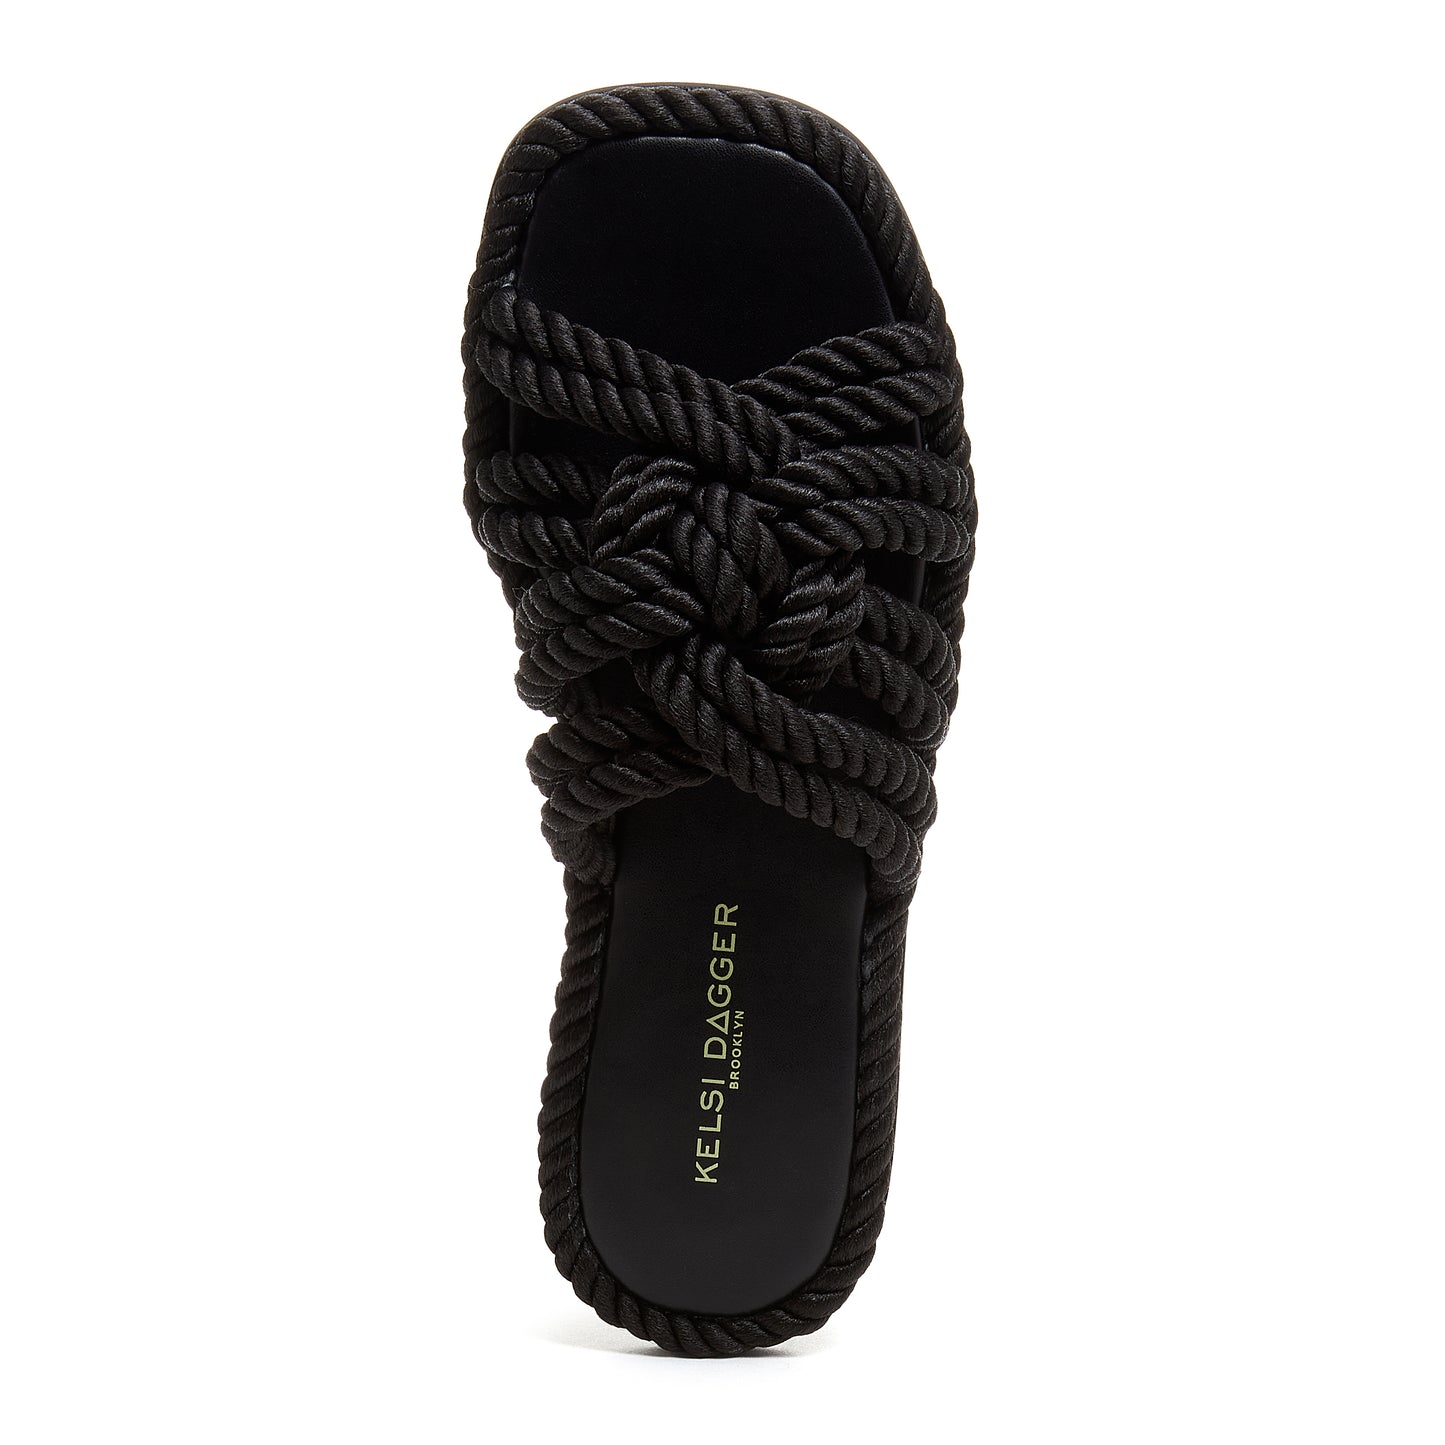 Beachy Black Rope Woven Sandals